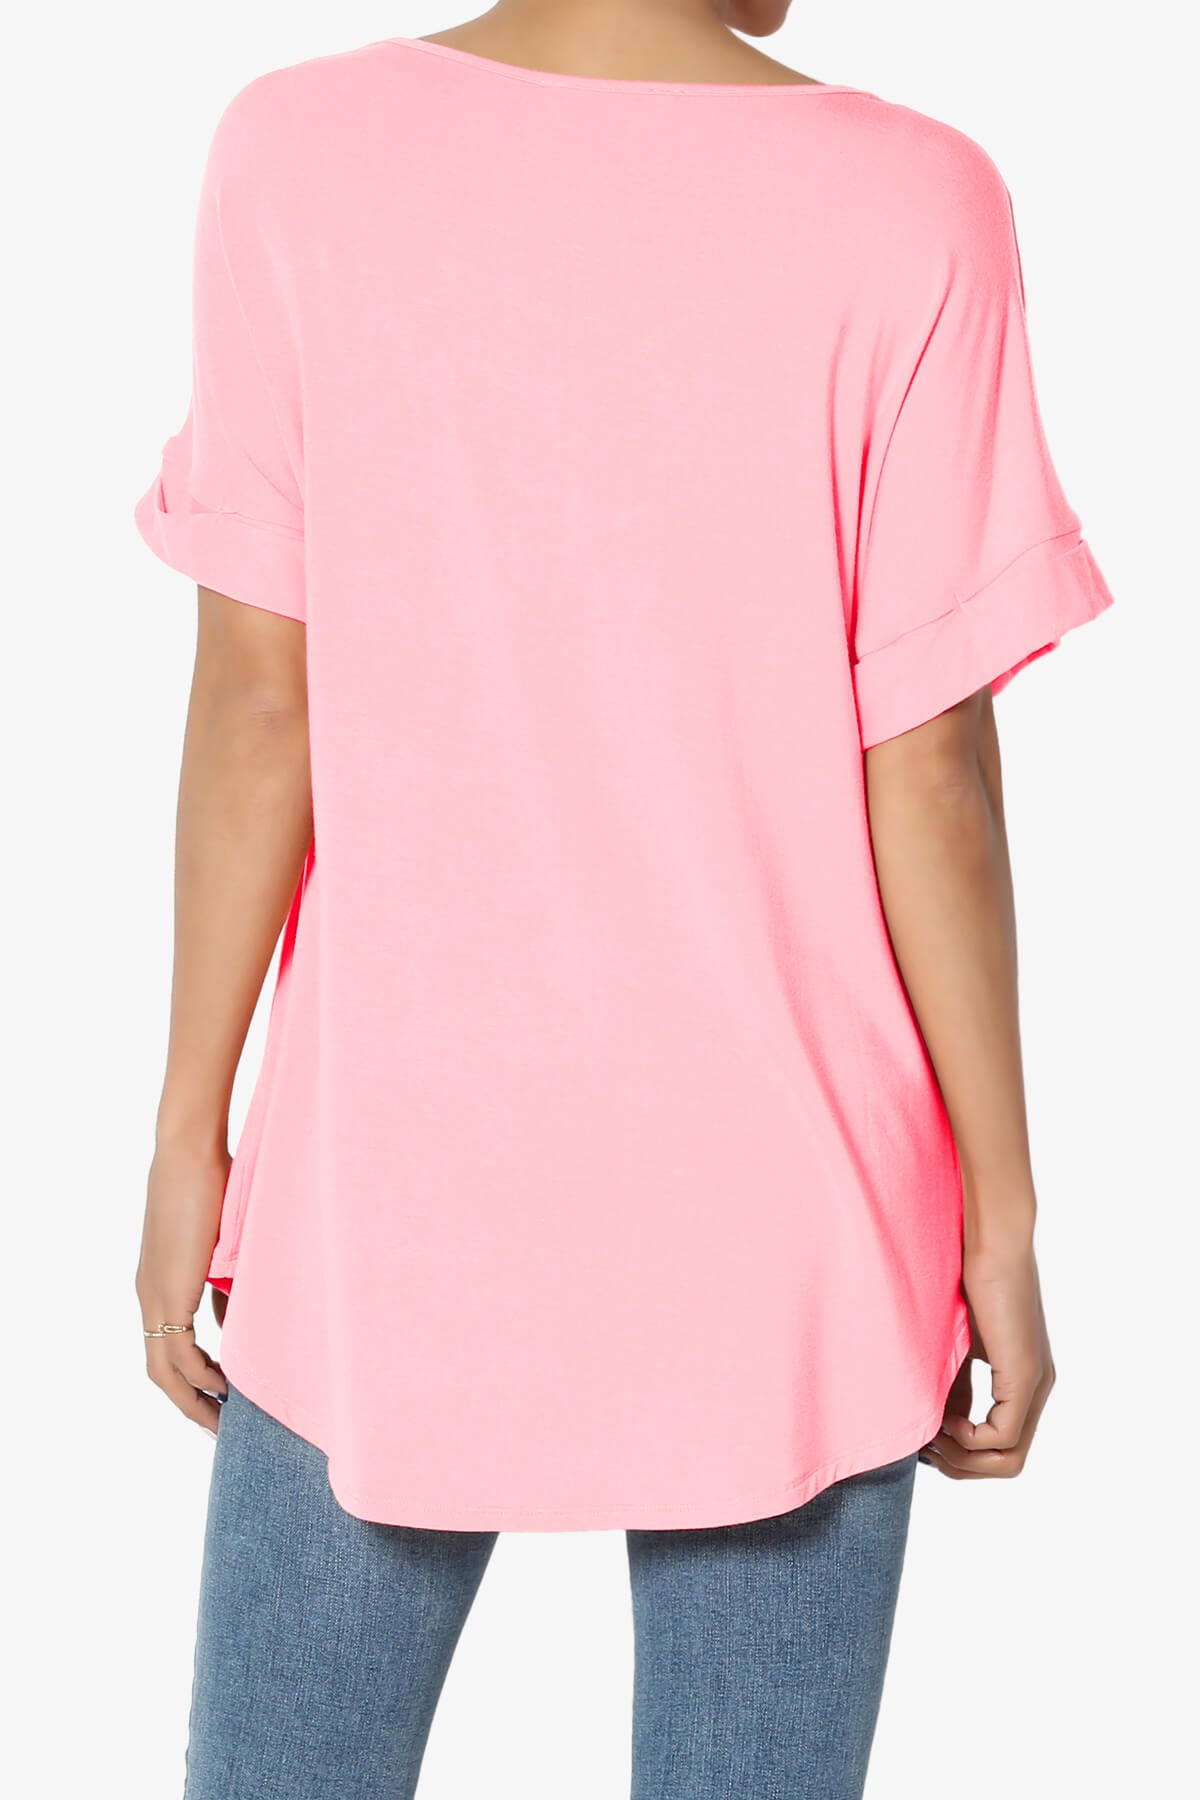 Tracey Wide V-Neck Jersey Top PLUS